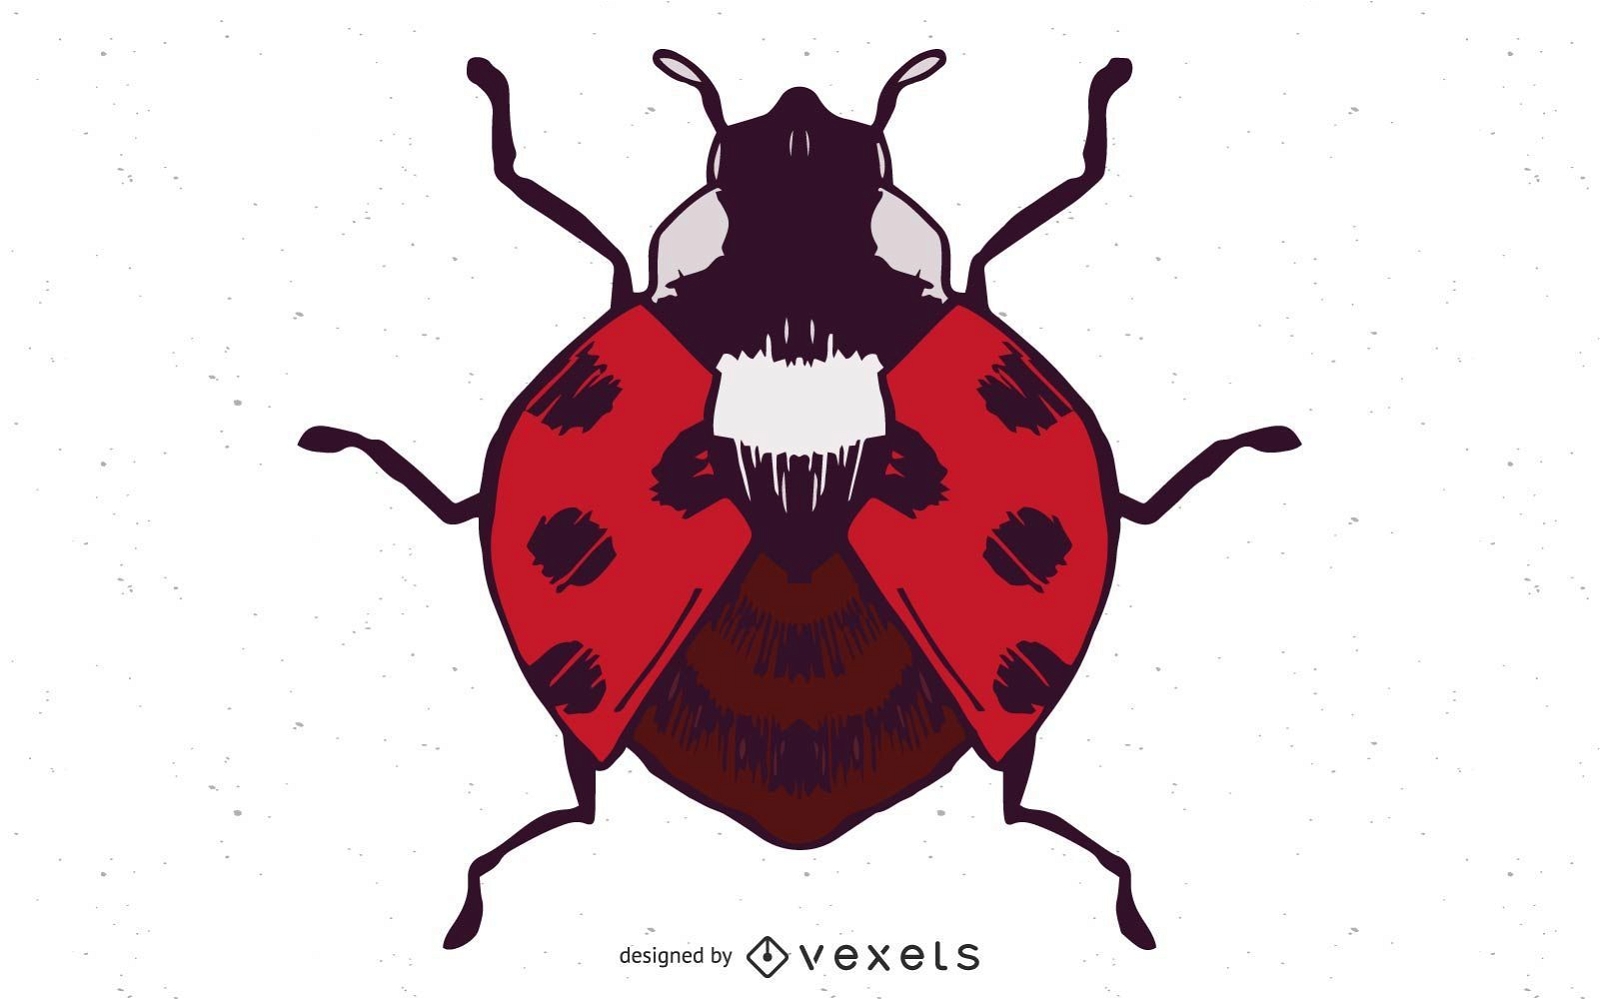 lady bug Vector PNG Image